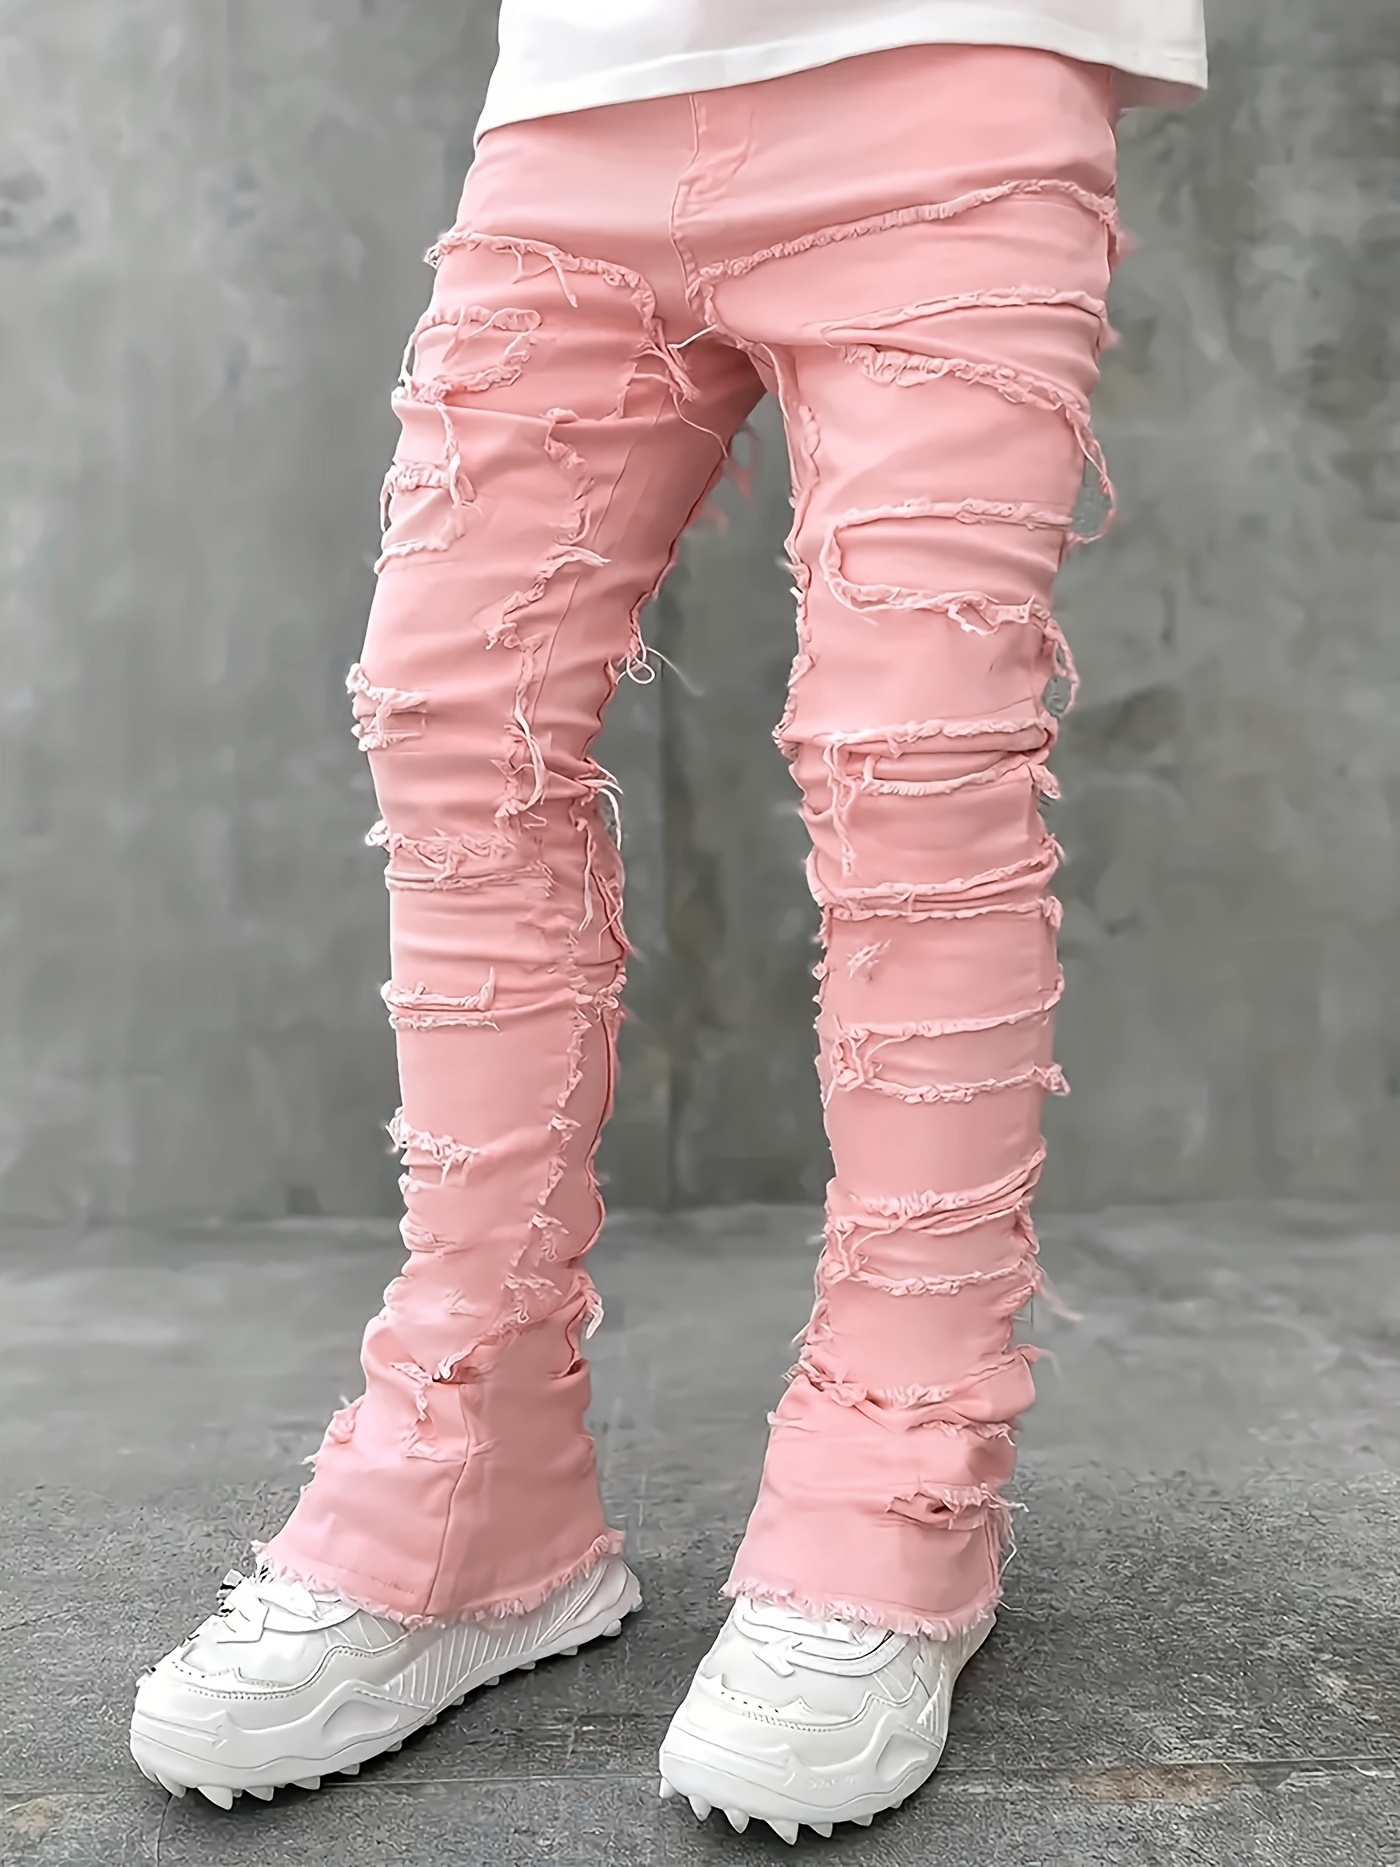 NEW JEANS